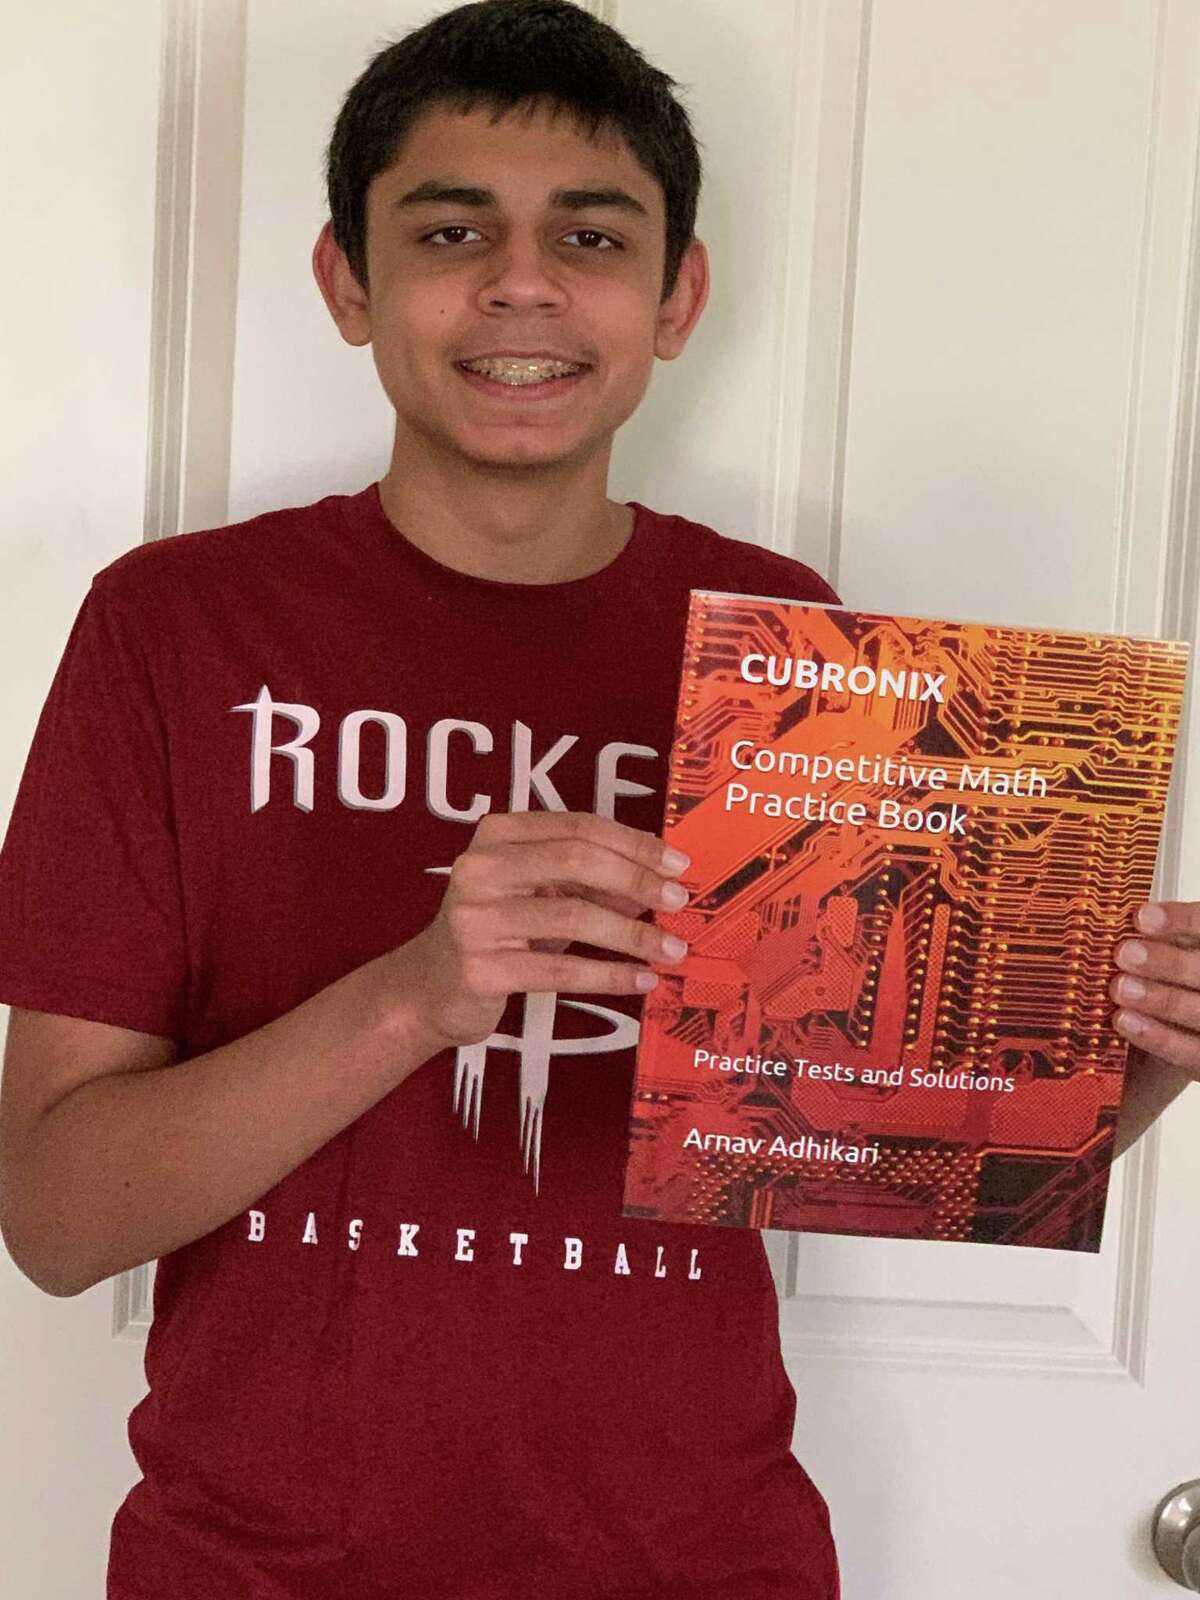 Carnegie Vanguard High School sophomore Arnav Adhikari wrote his own competitive math practice textbook: CUBRONIX Competitive Math Practice Book: Practice Tests and Solutions (Book 1) in less than a year.